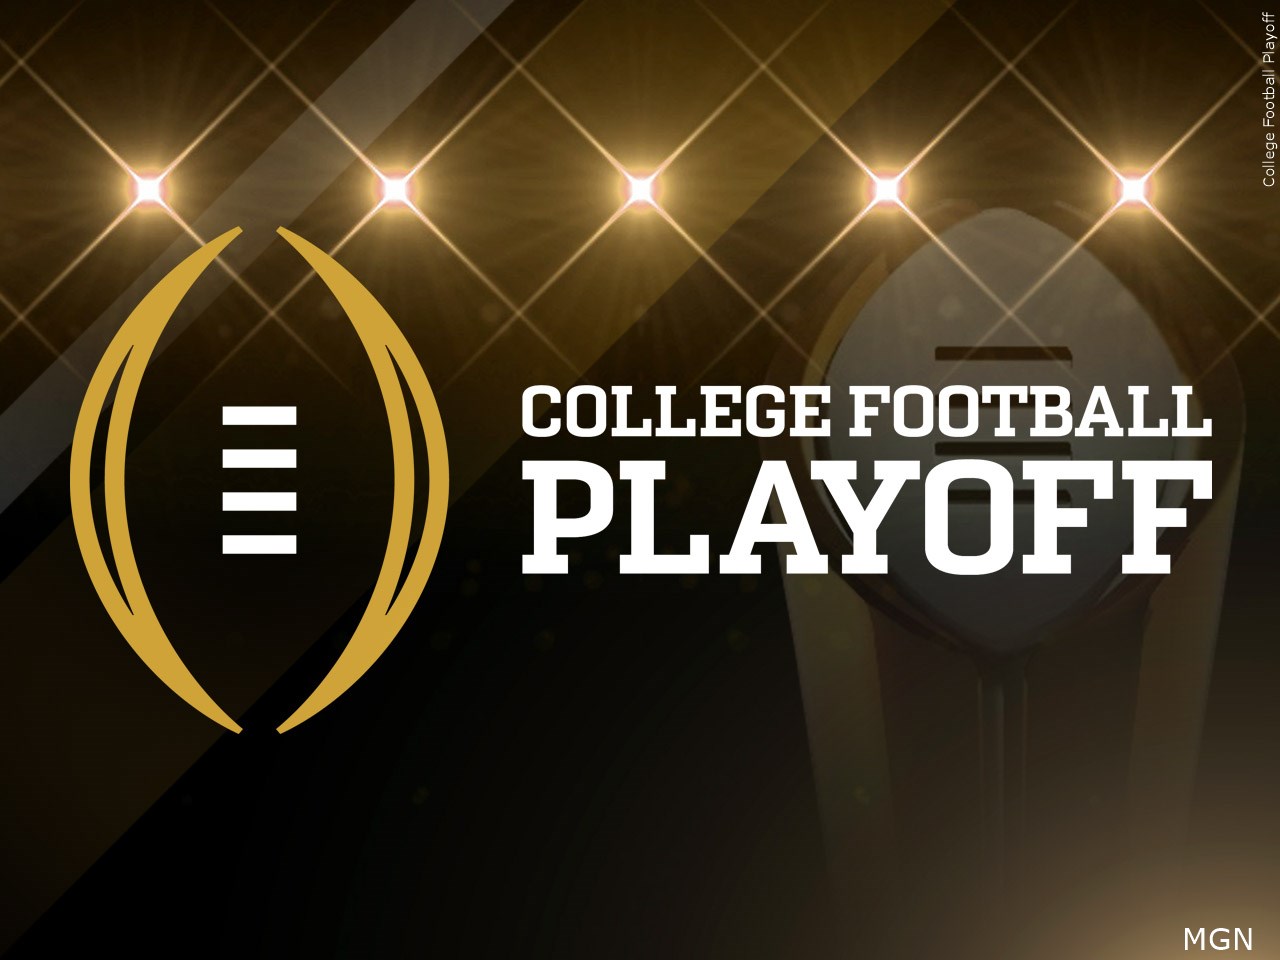 College Football Playoff expands to 12 teams in 2024 season WVUA 23